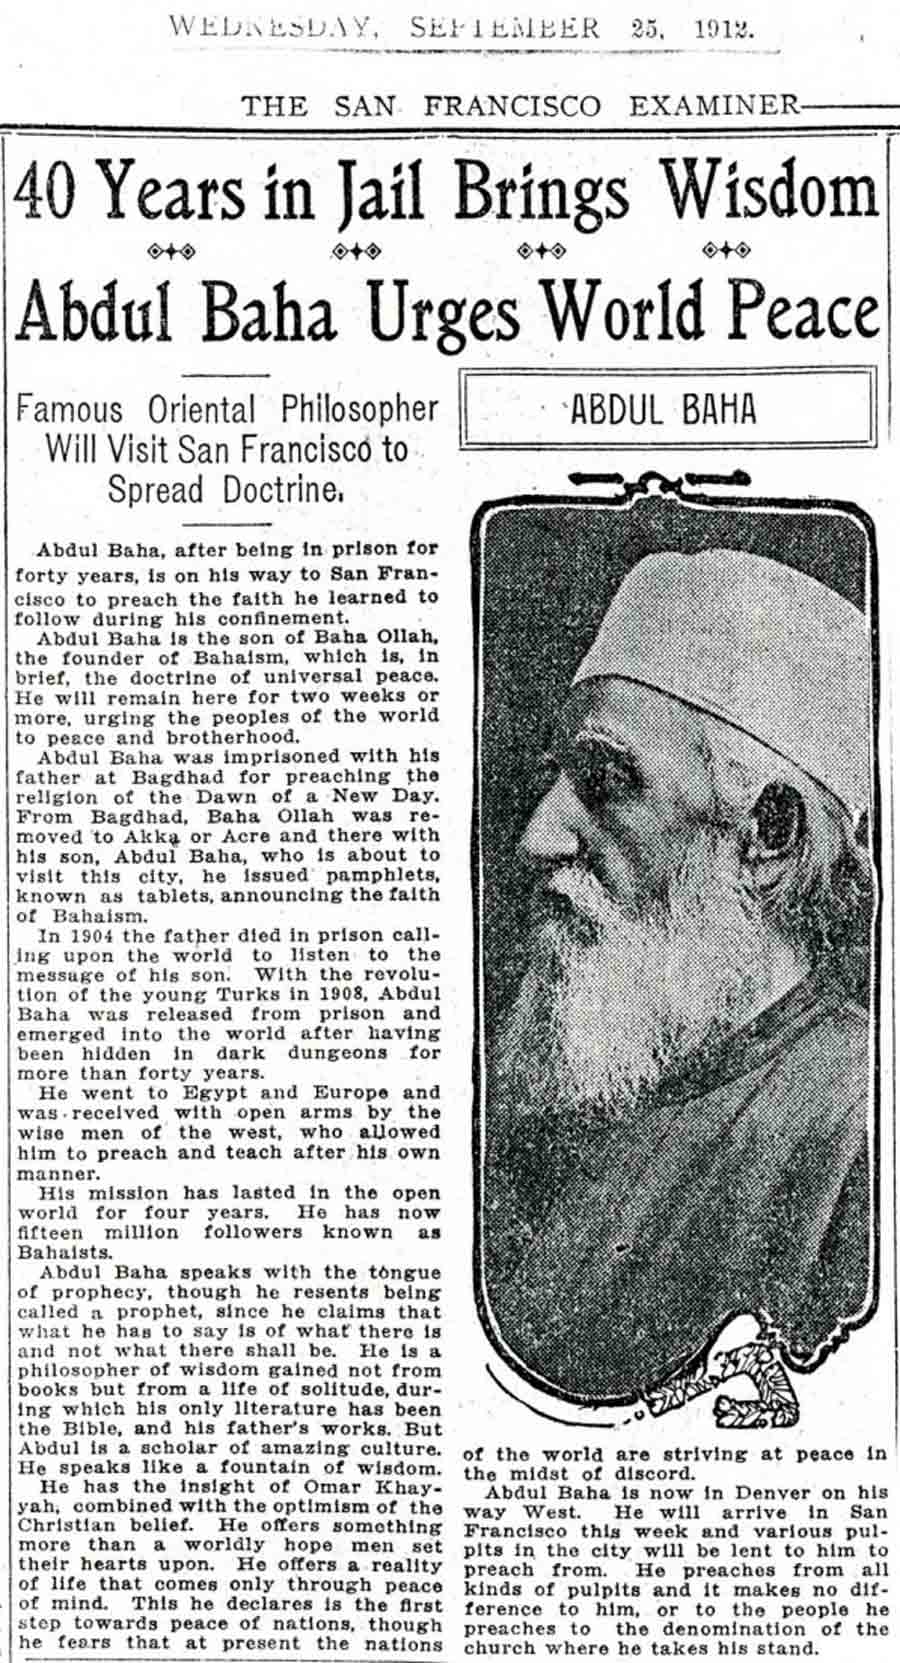 This article from The San Francisco Examiner on 25 September 1912 describes ‘Abdu’l-Baha’s plans to visit the city.